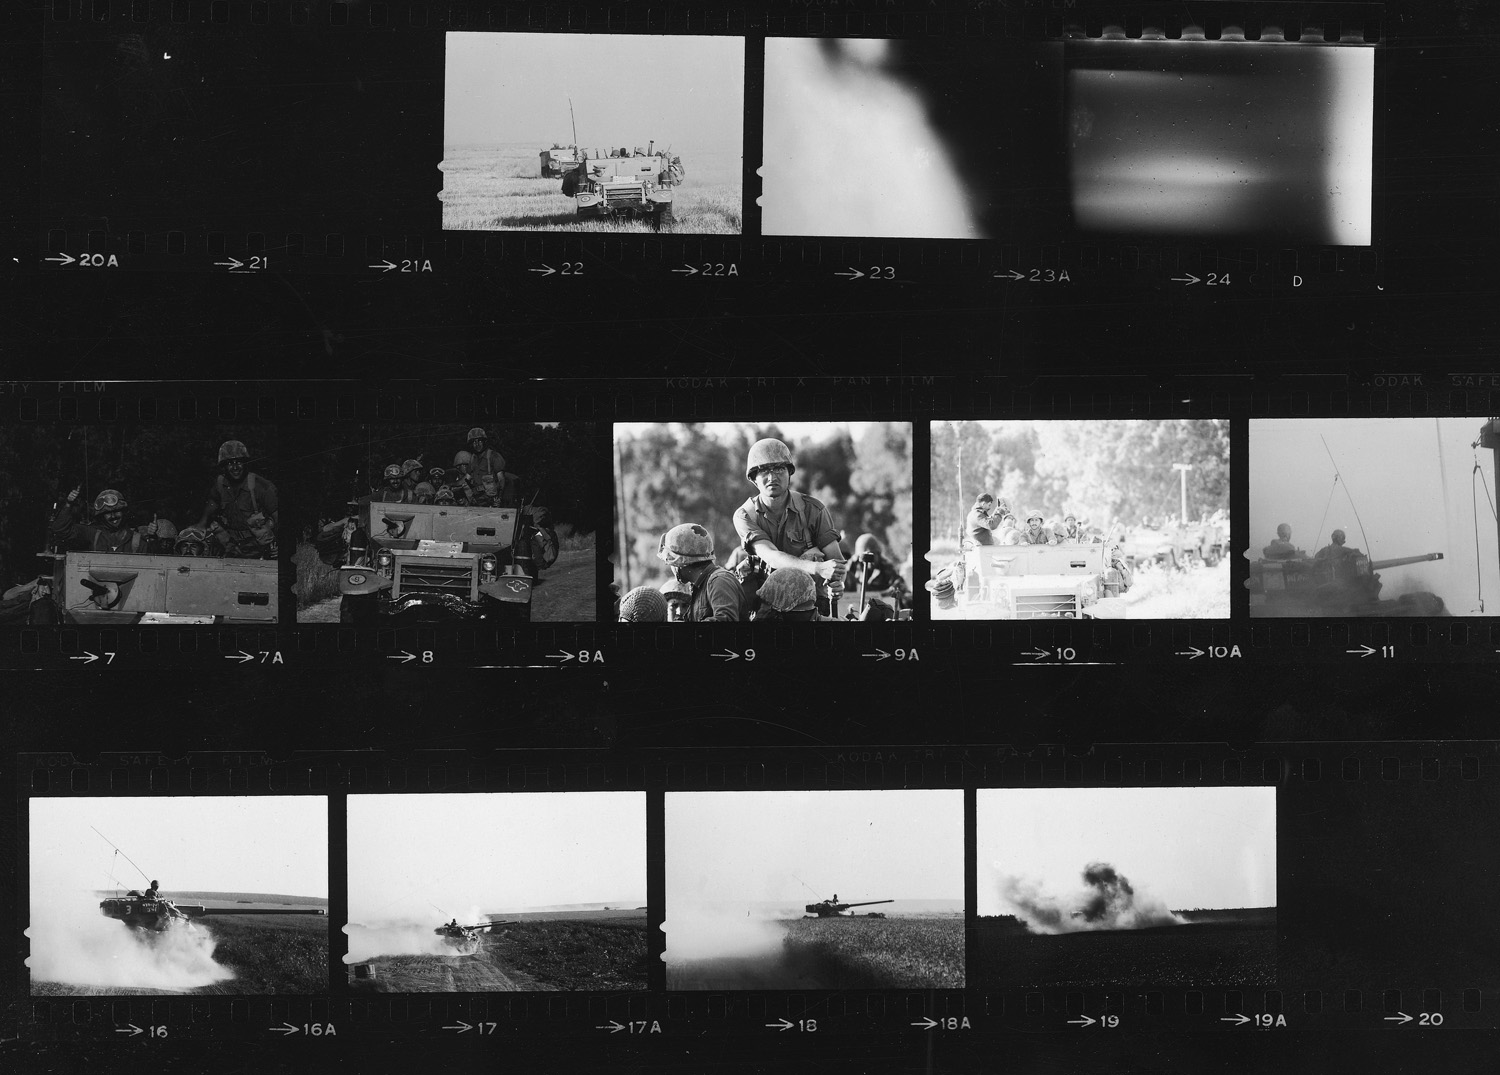 Contact sheet with last 6 strips of film found in LIFE photographer Paul Schutzer's camera after he was killed while traveling in a half-track with Israeli soldiers during the Six Day War in 1967.